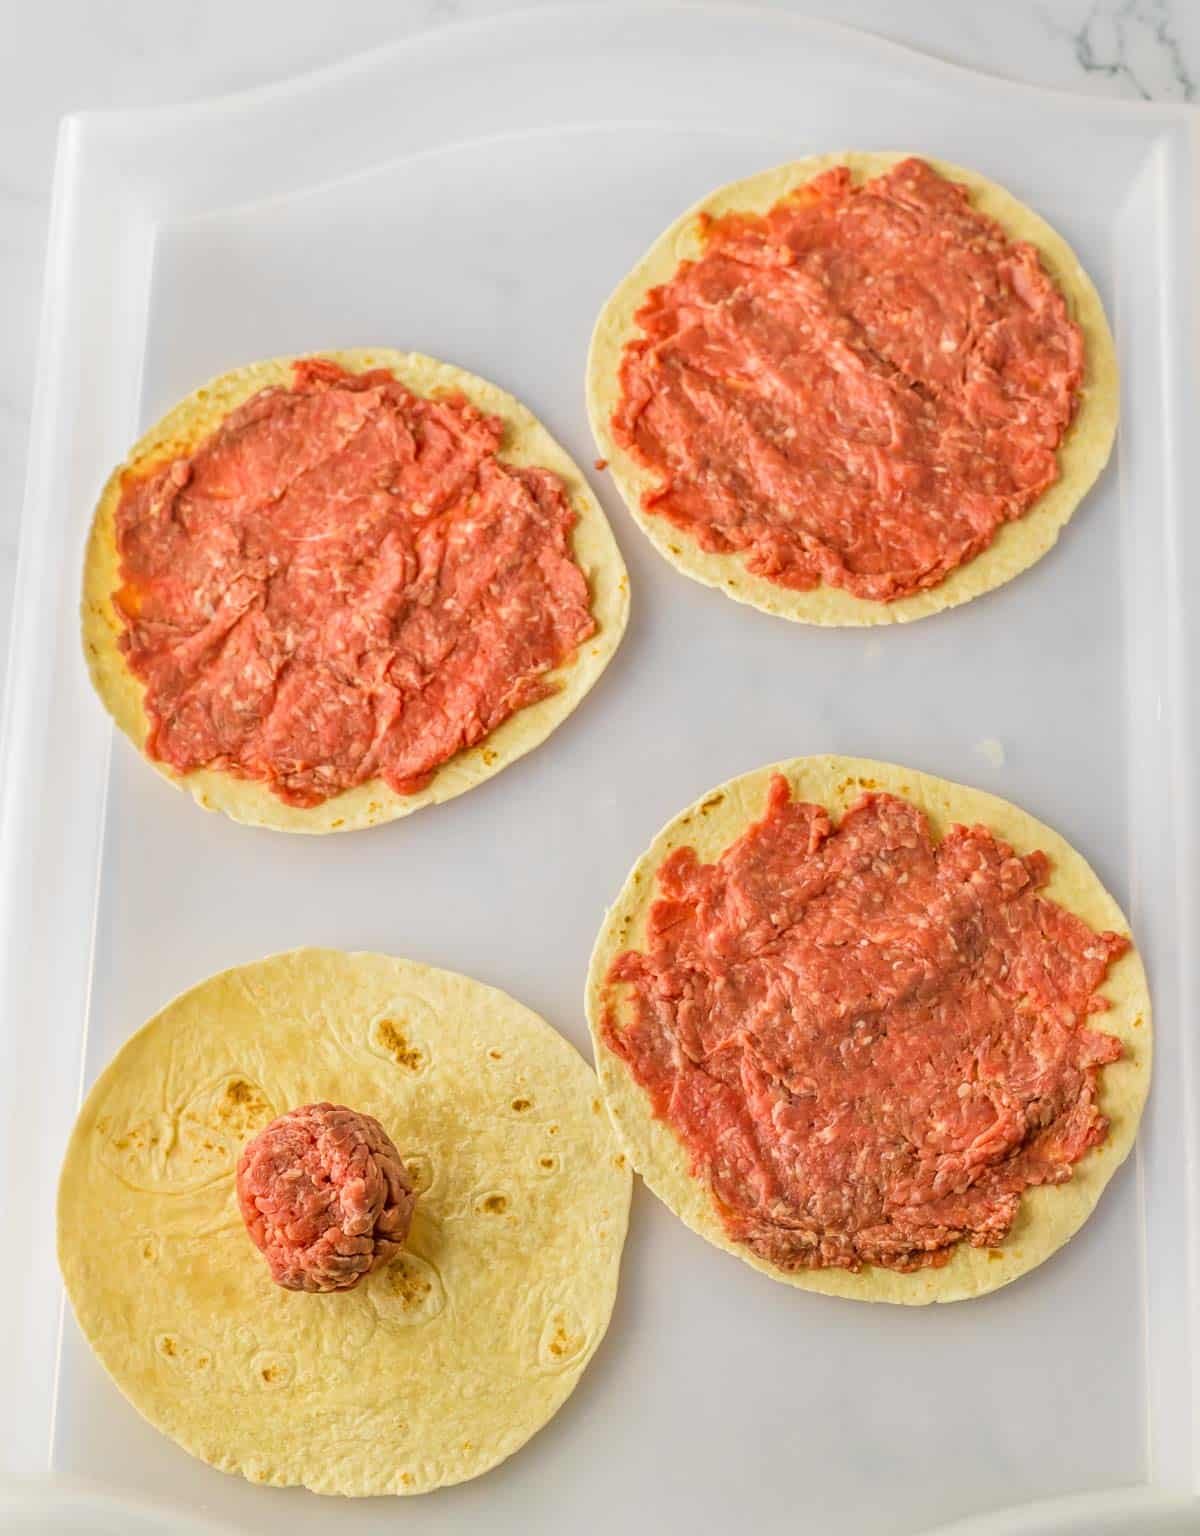 Four tortillas with meat scooped and flattened on a baking sheet.